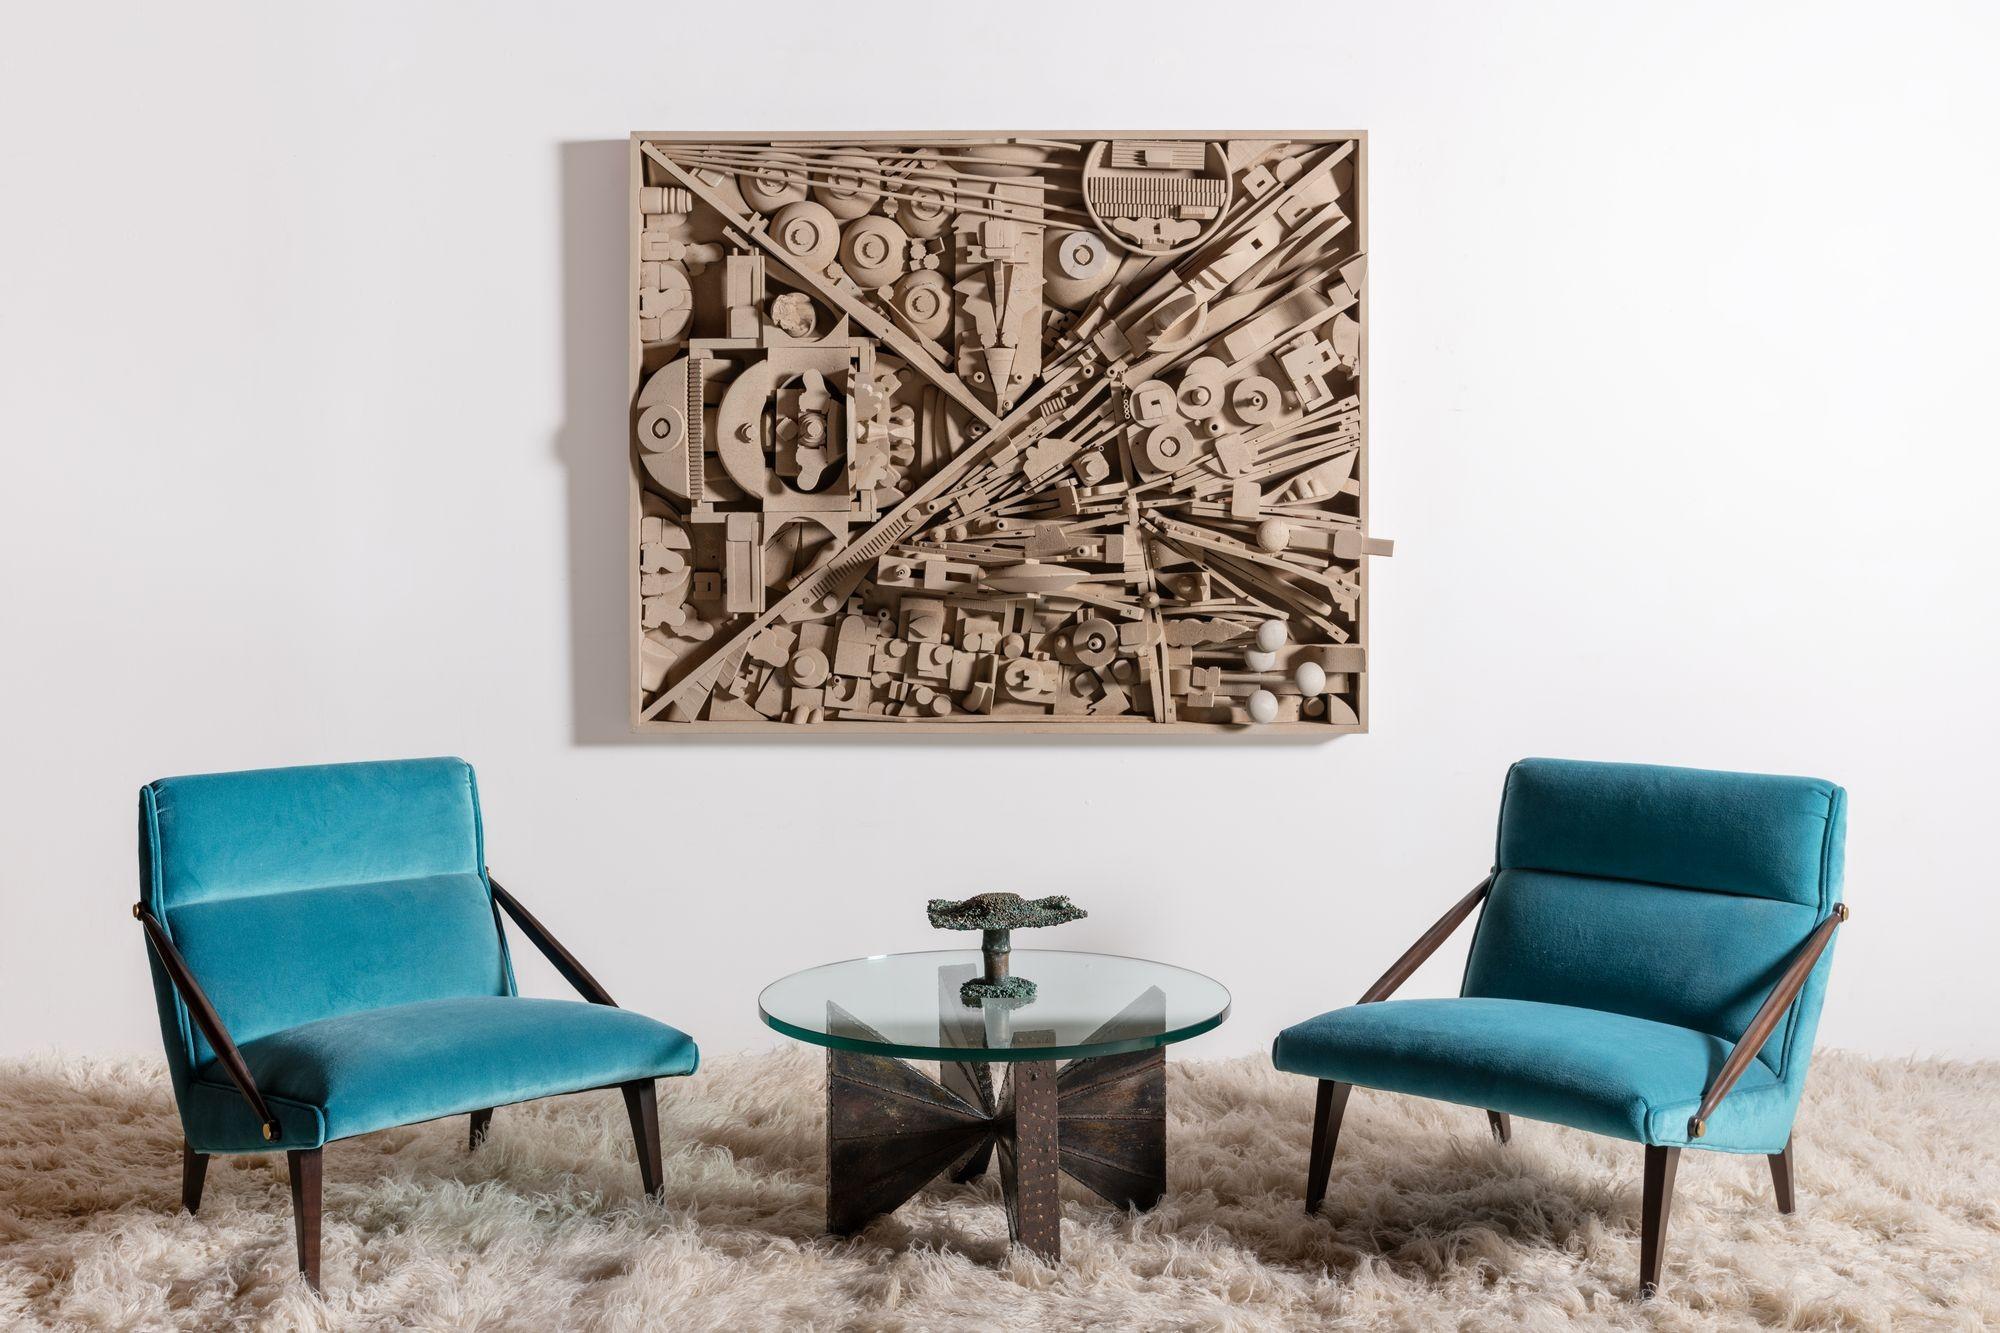 This monumental constructivist wall sculpture was created in the manner of Louise Nevelson's wedding series.
This is an extraordinary work of art that hung in a local Texas Attorney's Office for last 45 years.
Unfortunately, there are no